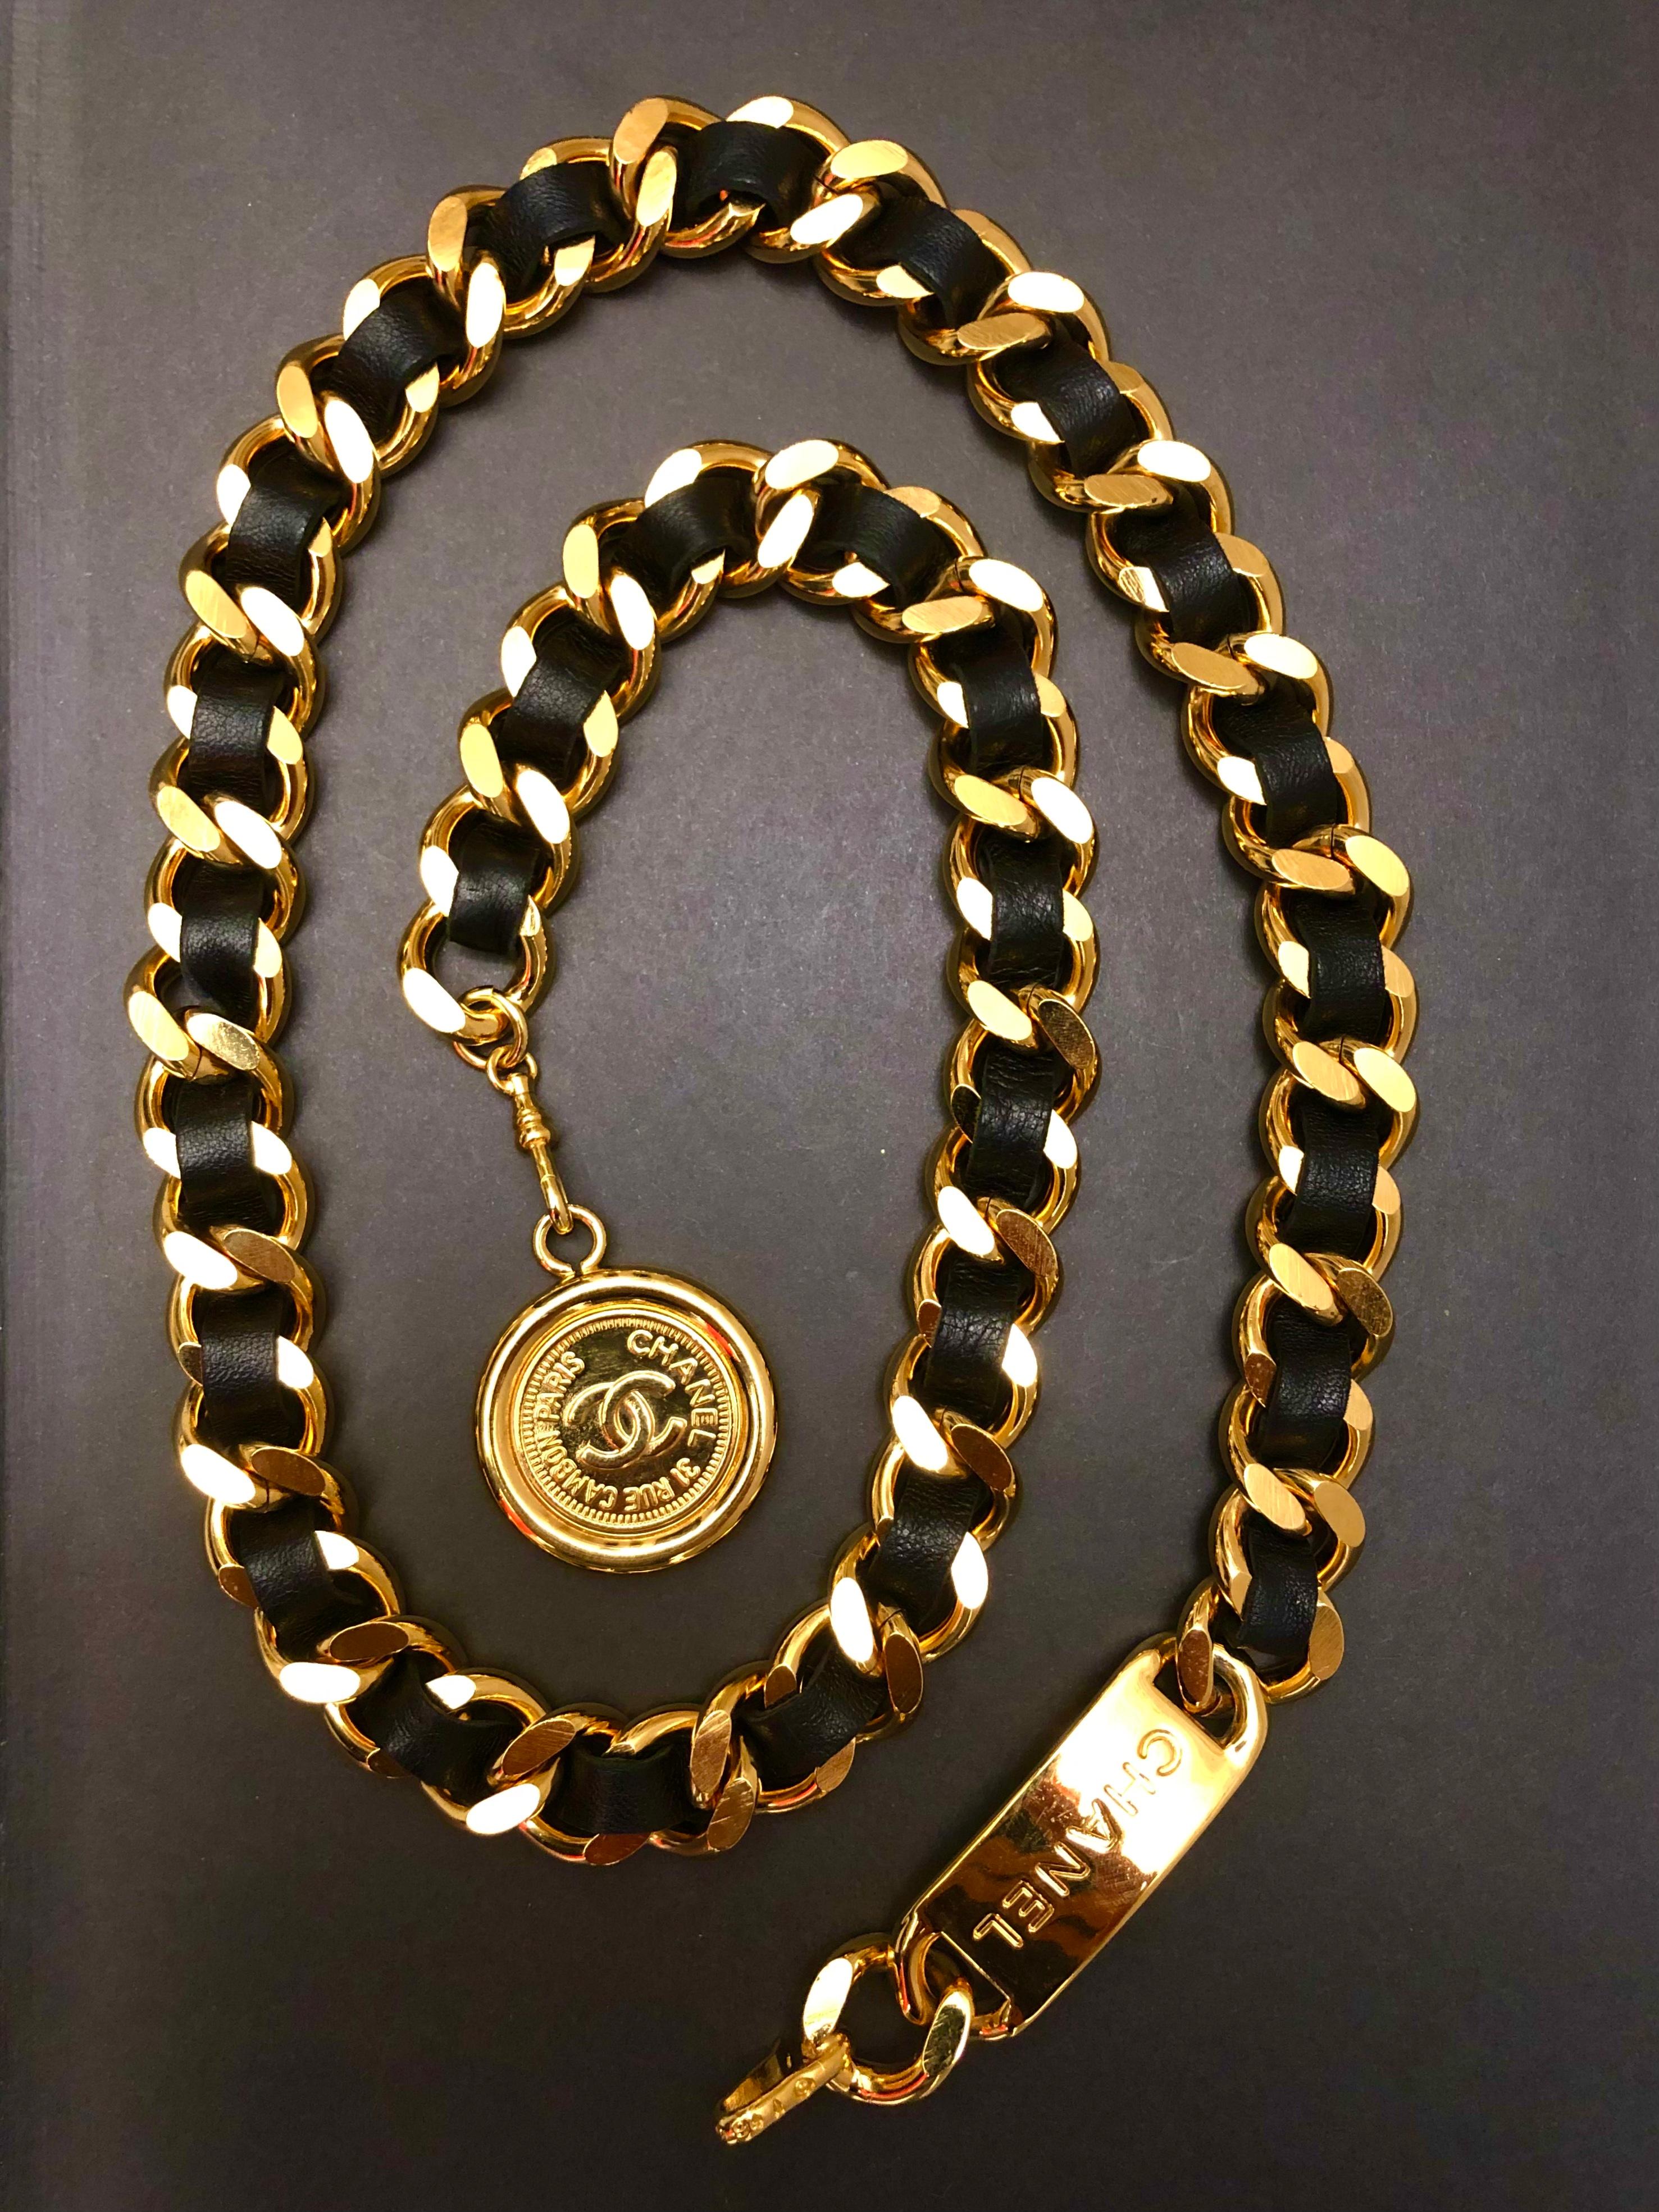 This vintage CHANEL chain belt is crafted of sturdy gold toned chain interlaced with black leather featuring a Cambon coin charm. Stamped 94A CHANEL. Chain length excluding coin measures approximately 81 cm (32 inches) width 1.2 cm. Comes with box.